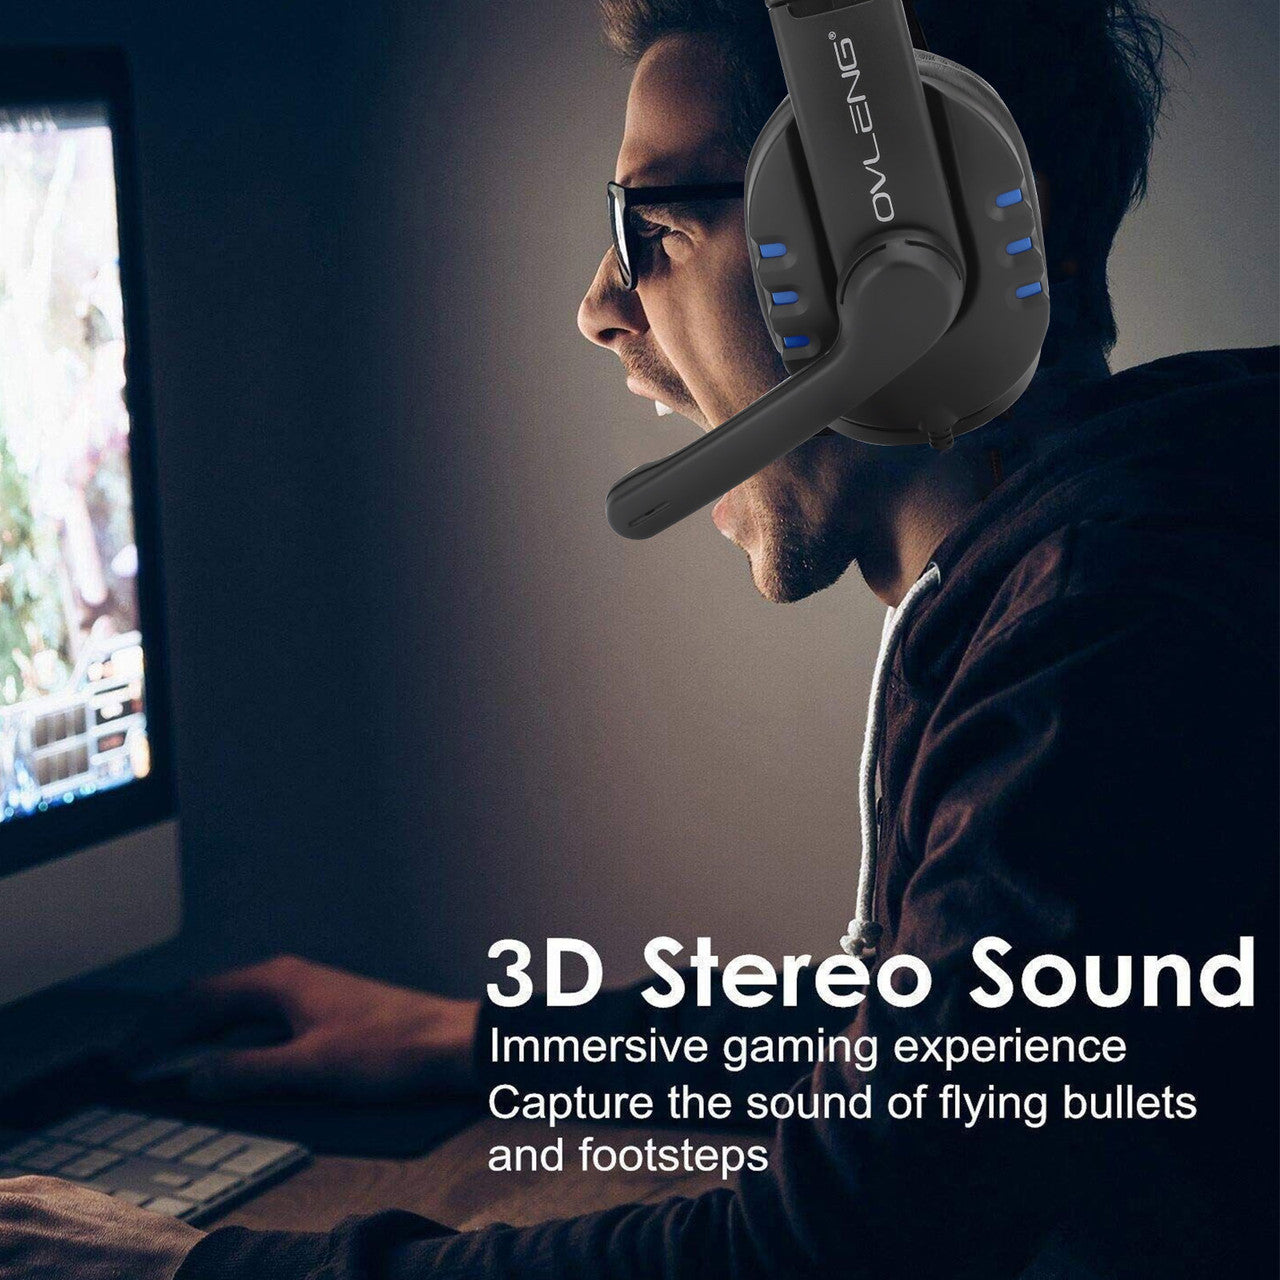 Stereo Gaming Headset with Noise-Canceling, Over Ear, Bass Sound, Soft Memory Earmuffs, amd Mic Volume Control for PS4, Xbox One, PC, Nintendo and Ipad